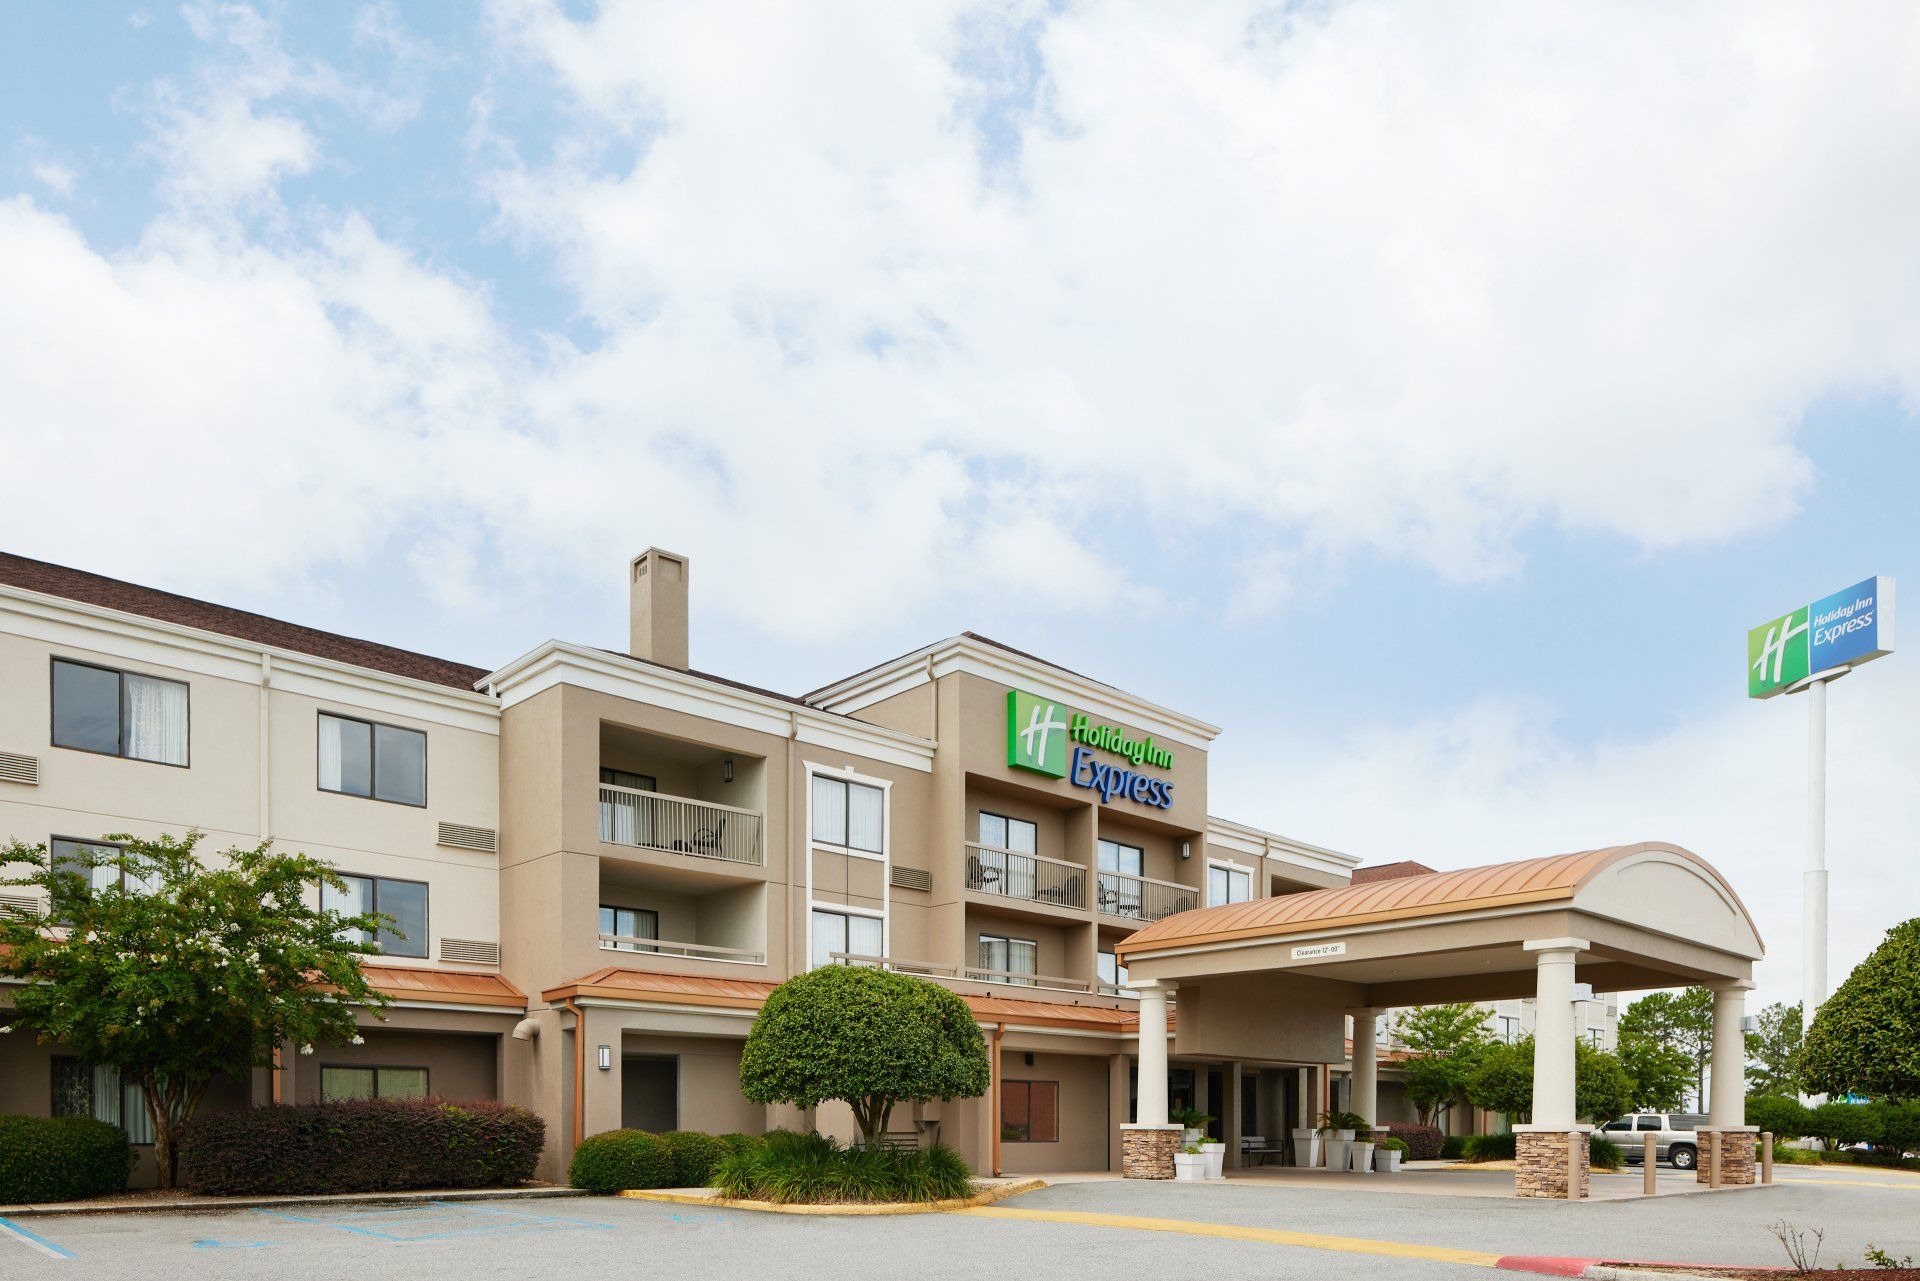 Exterior with porches at the Holiday Inn Express in Tifton, GA.